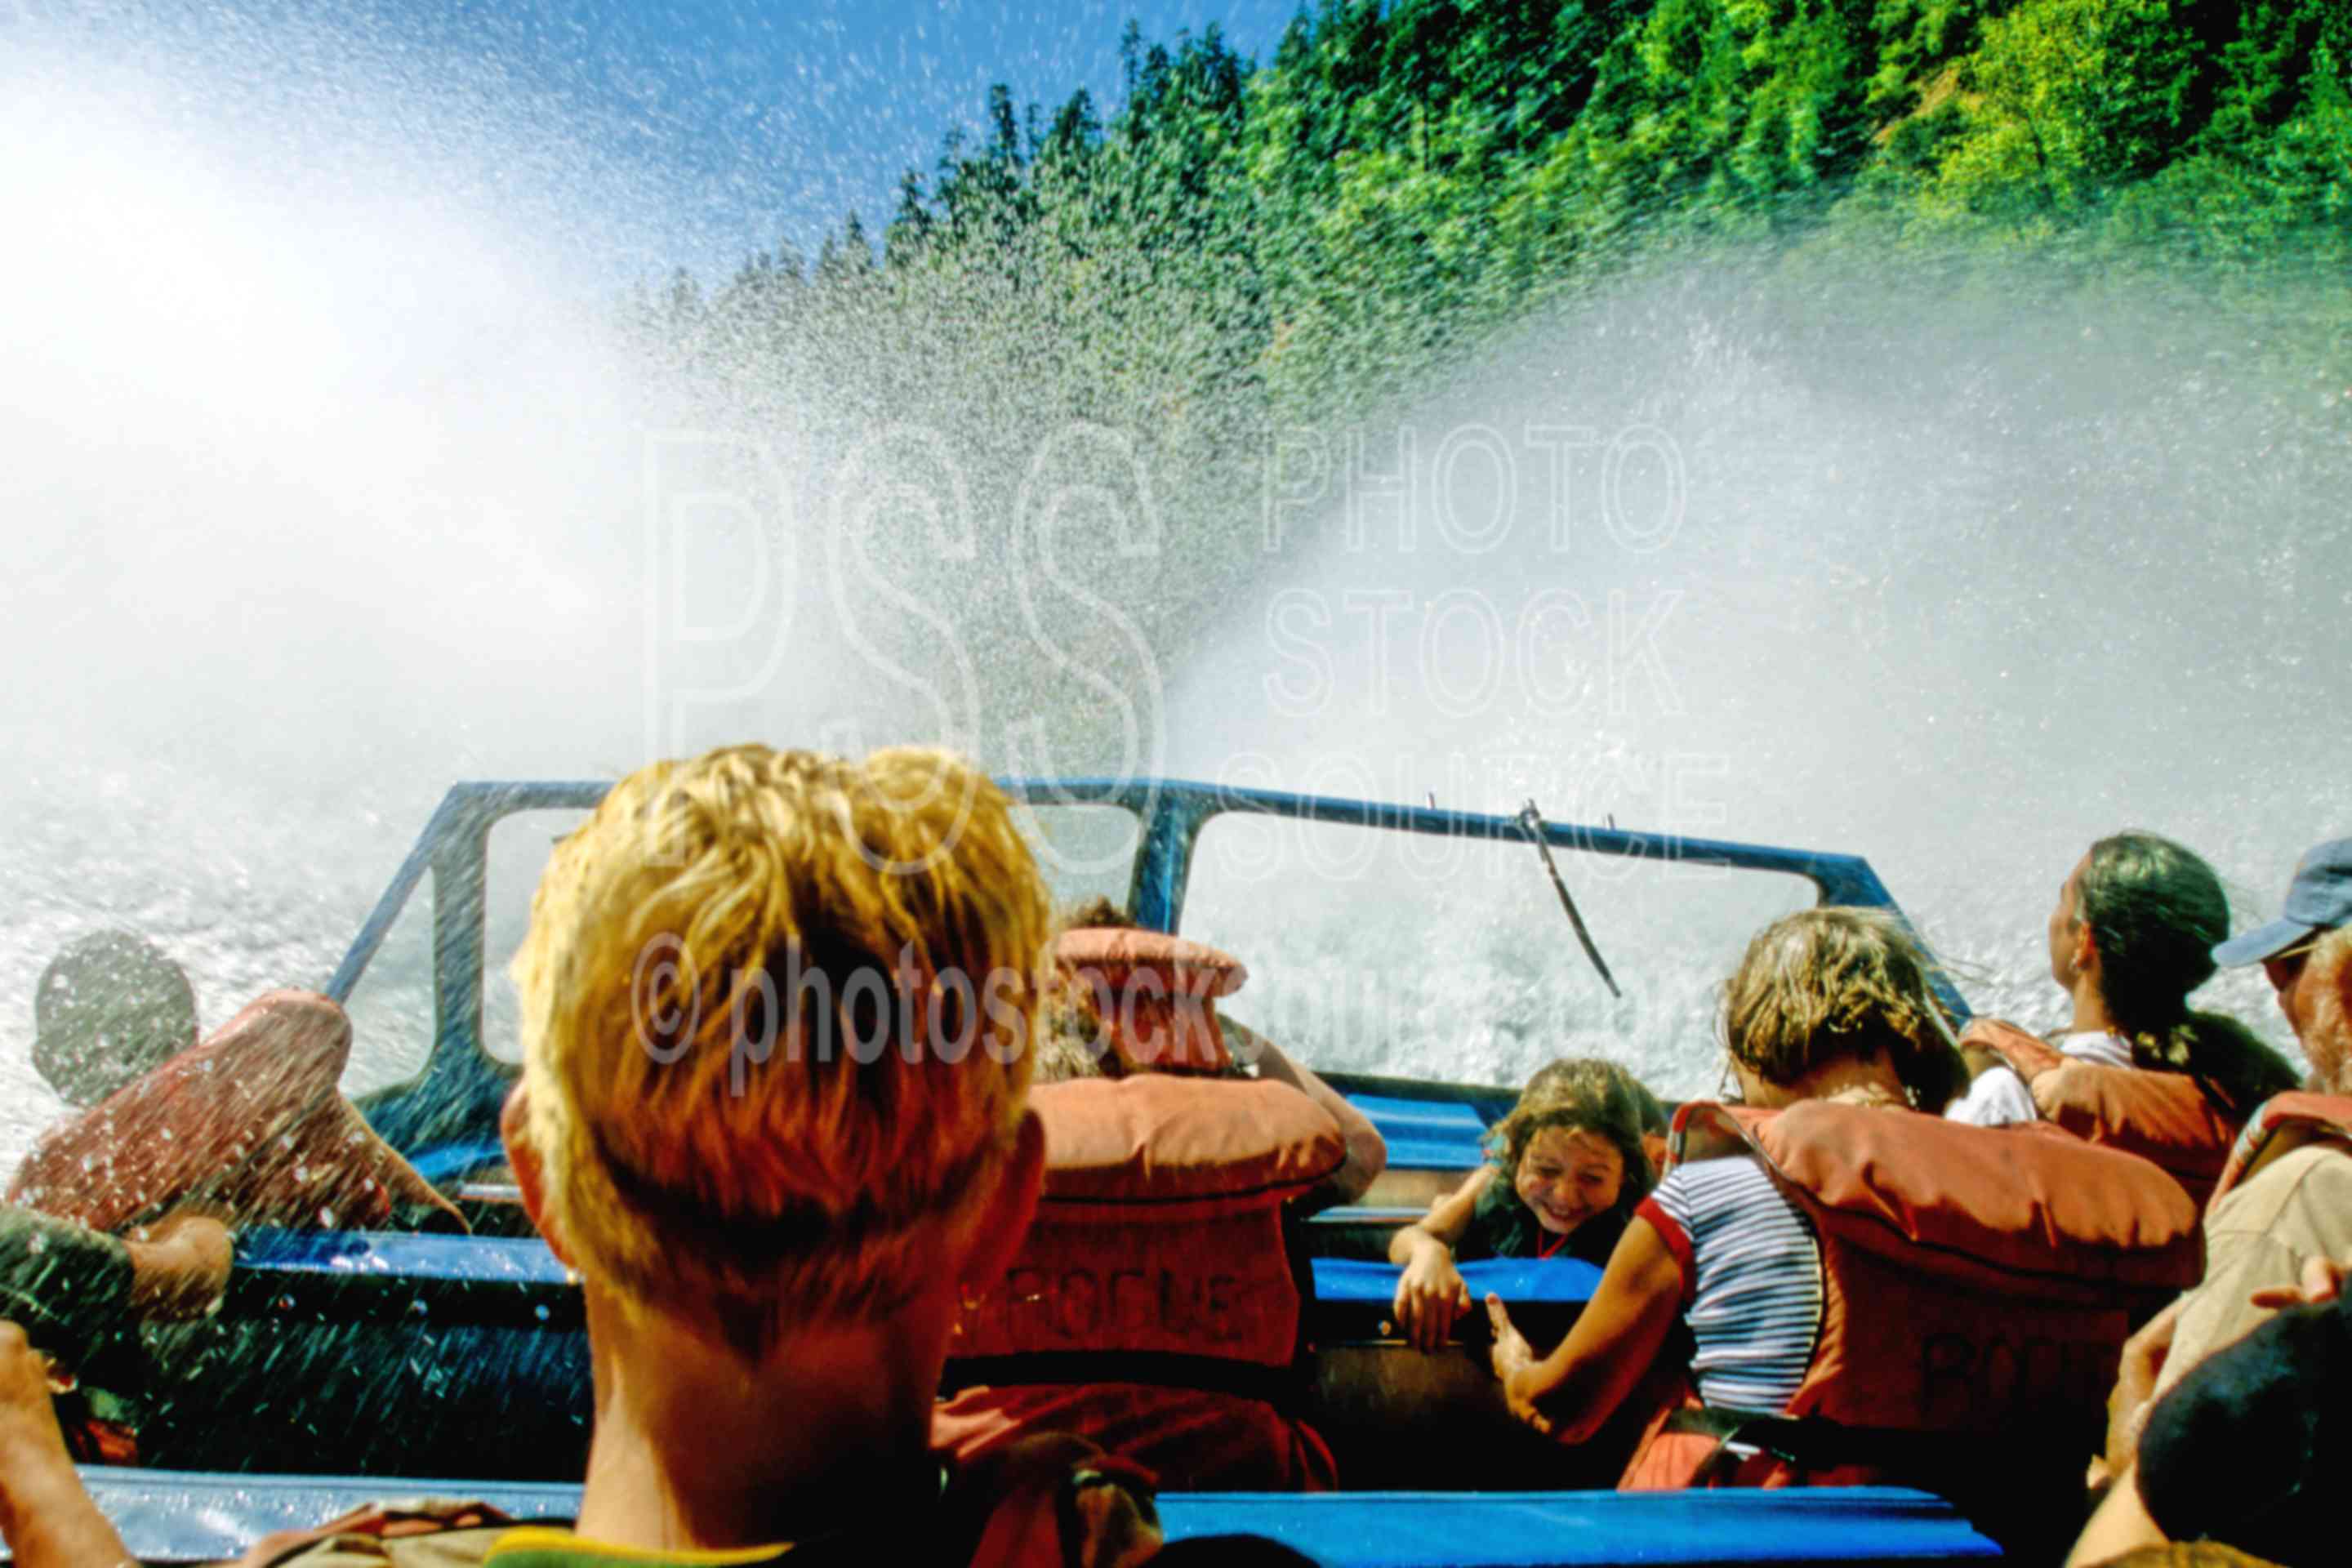 Rogue River Jet Boat,jet boat,rapids,river,wets,people,usas,lakes rivers,boats